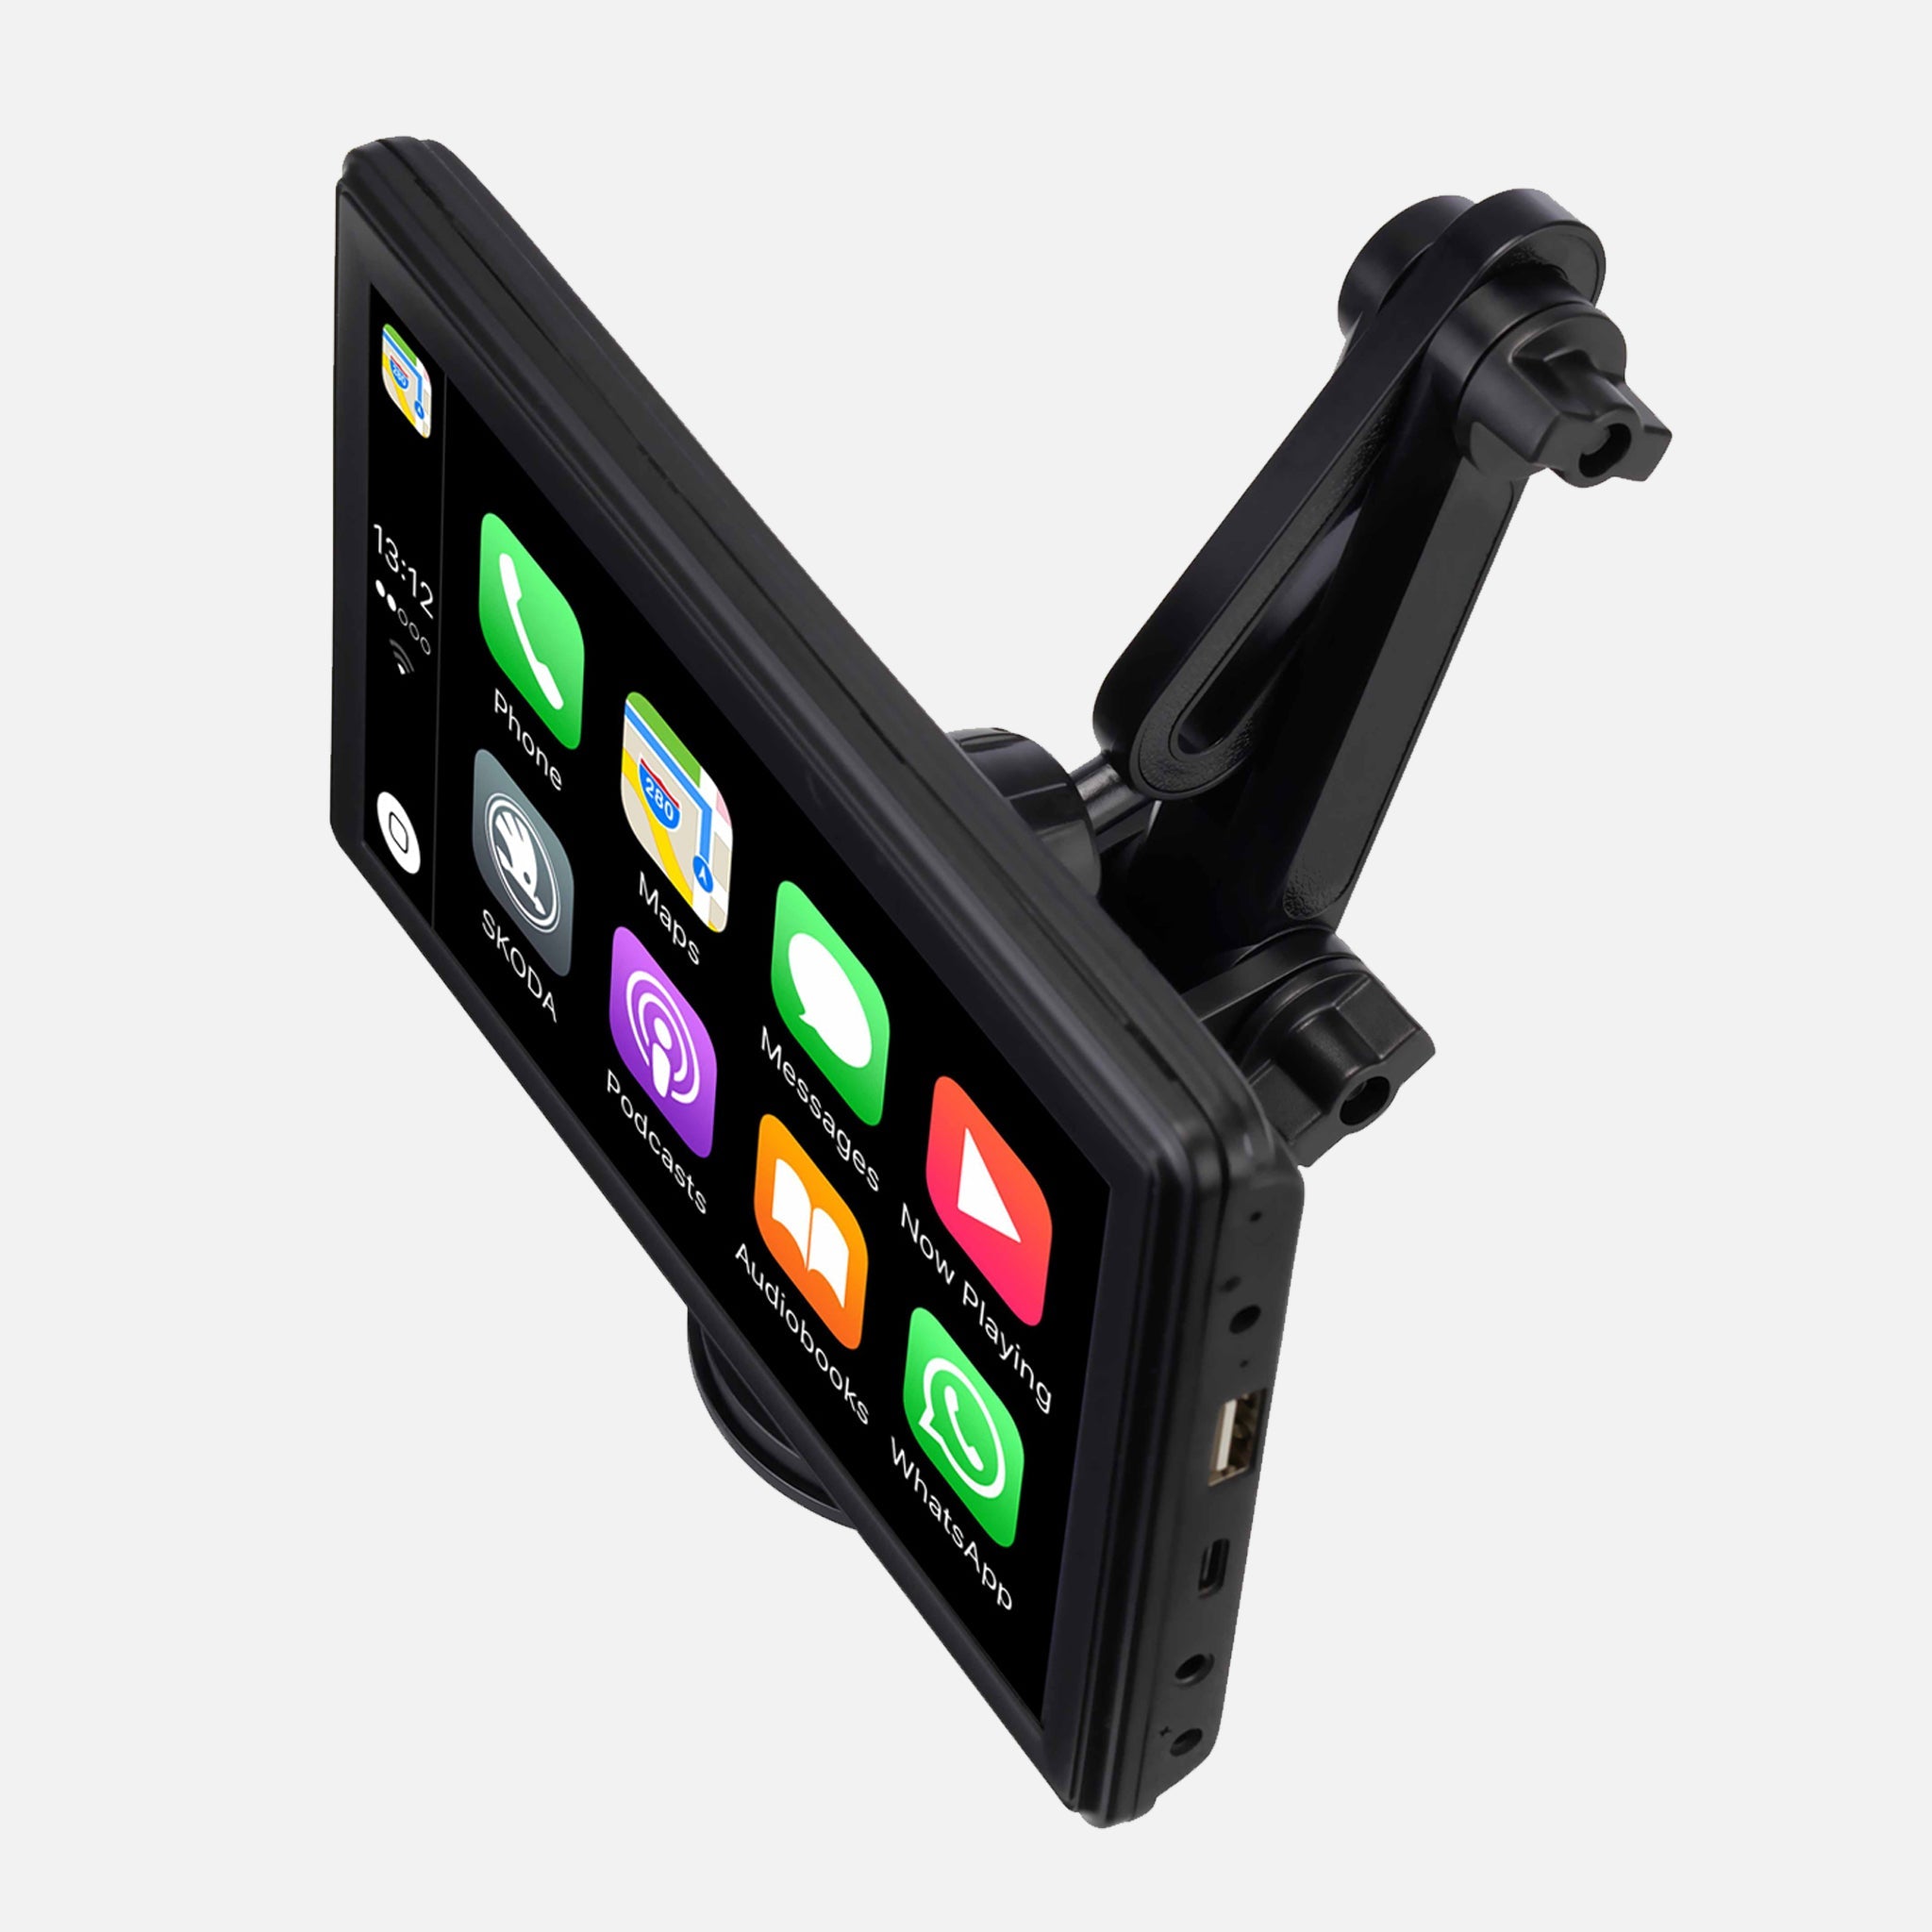 REFURBISHED - INTELLIDASH® PRO S WIRELESS EASY-MOUNT 7" IPS TOUCH DISPLAY - CAR AND DRIVER DU2000RB